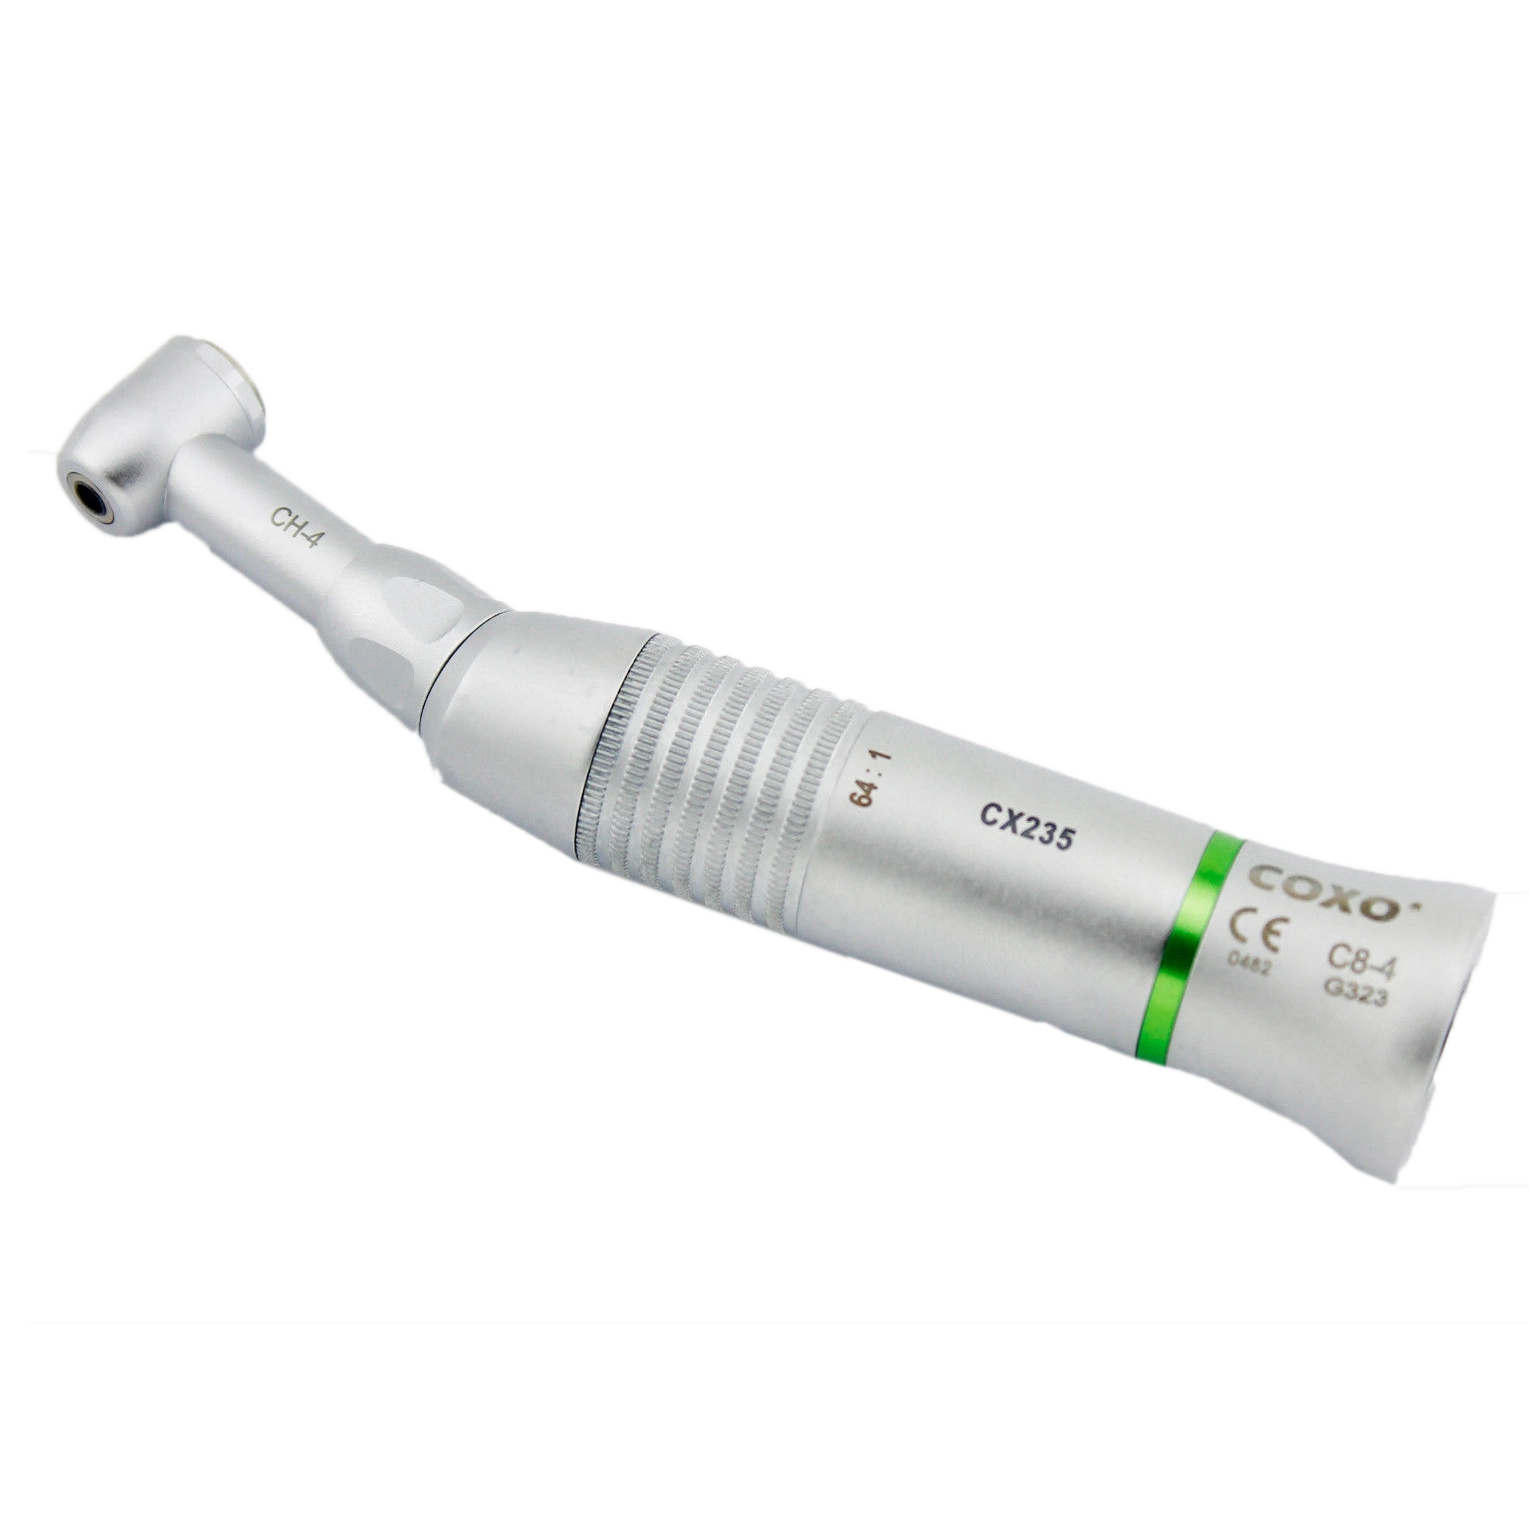 Endodontic Contra-Angle Handpiece, 10:1, without light, for manuel needles, 45° back and forth rotation - (available only in Hungary)